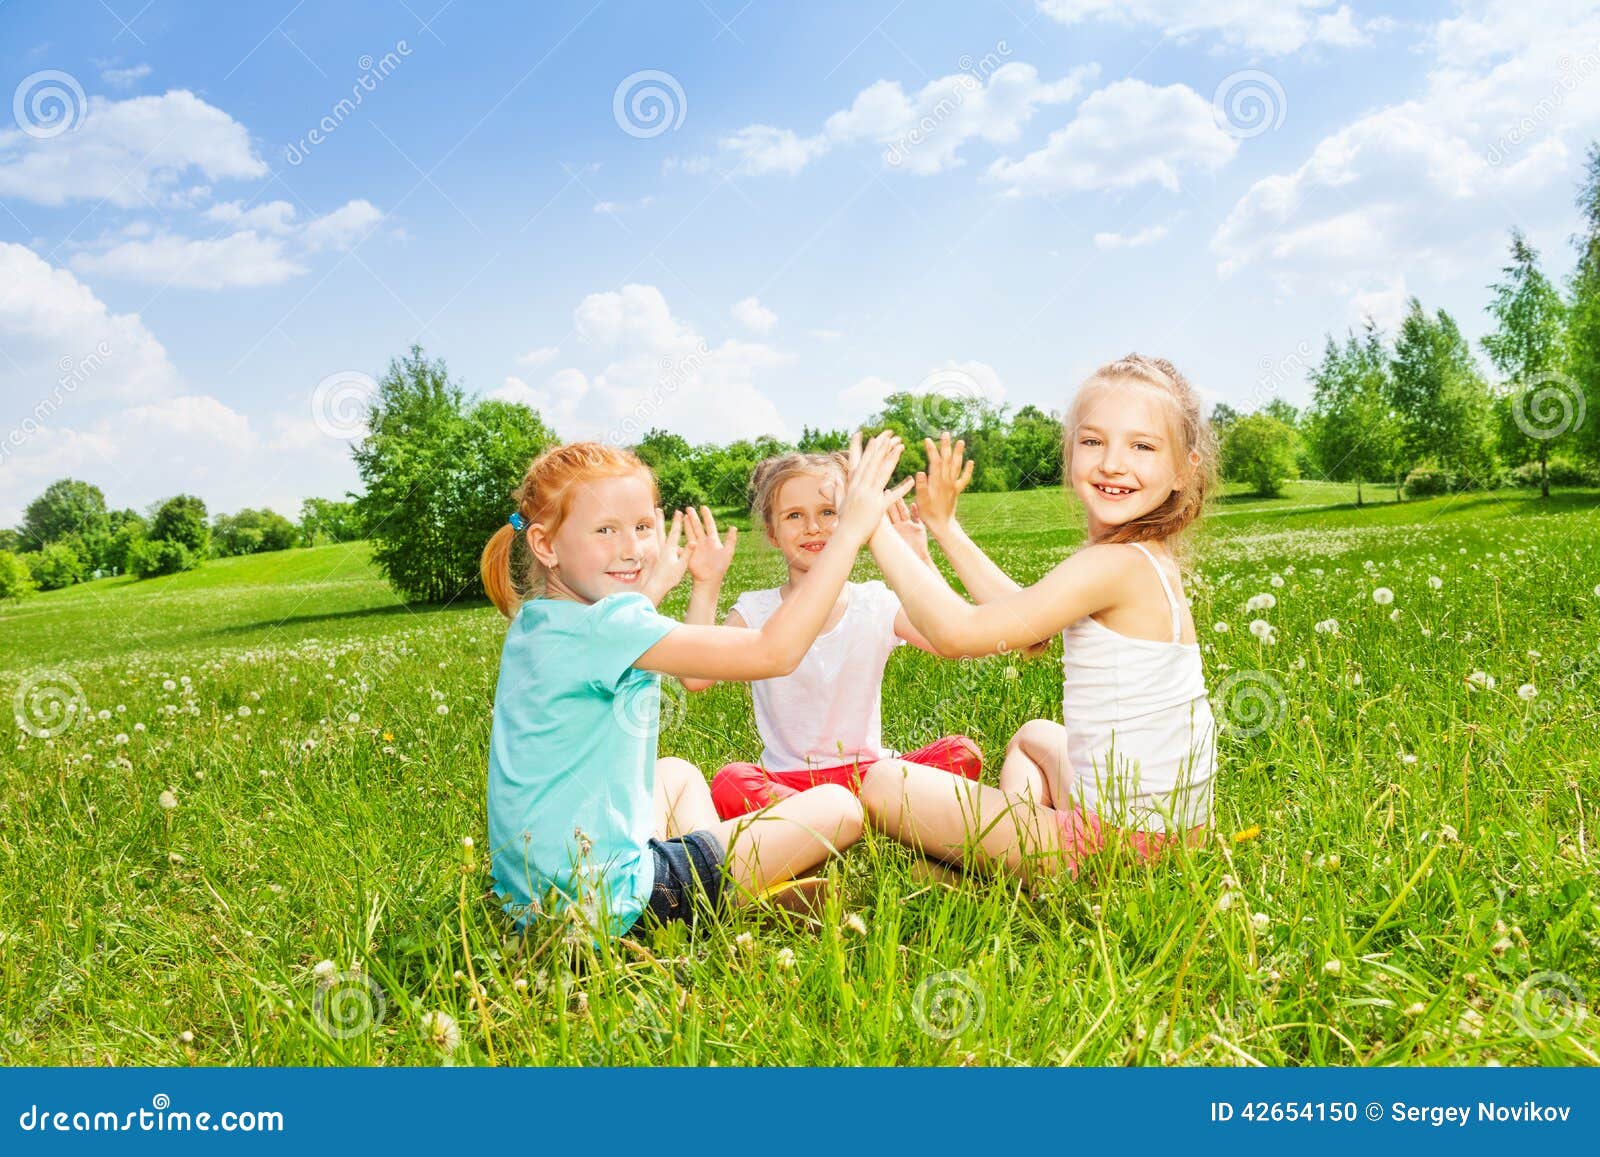 Three Kids Playing on a Grass Stock Photo - Image of group, grass: 42654150